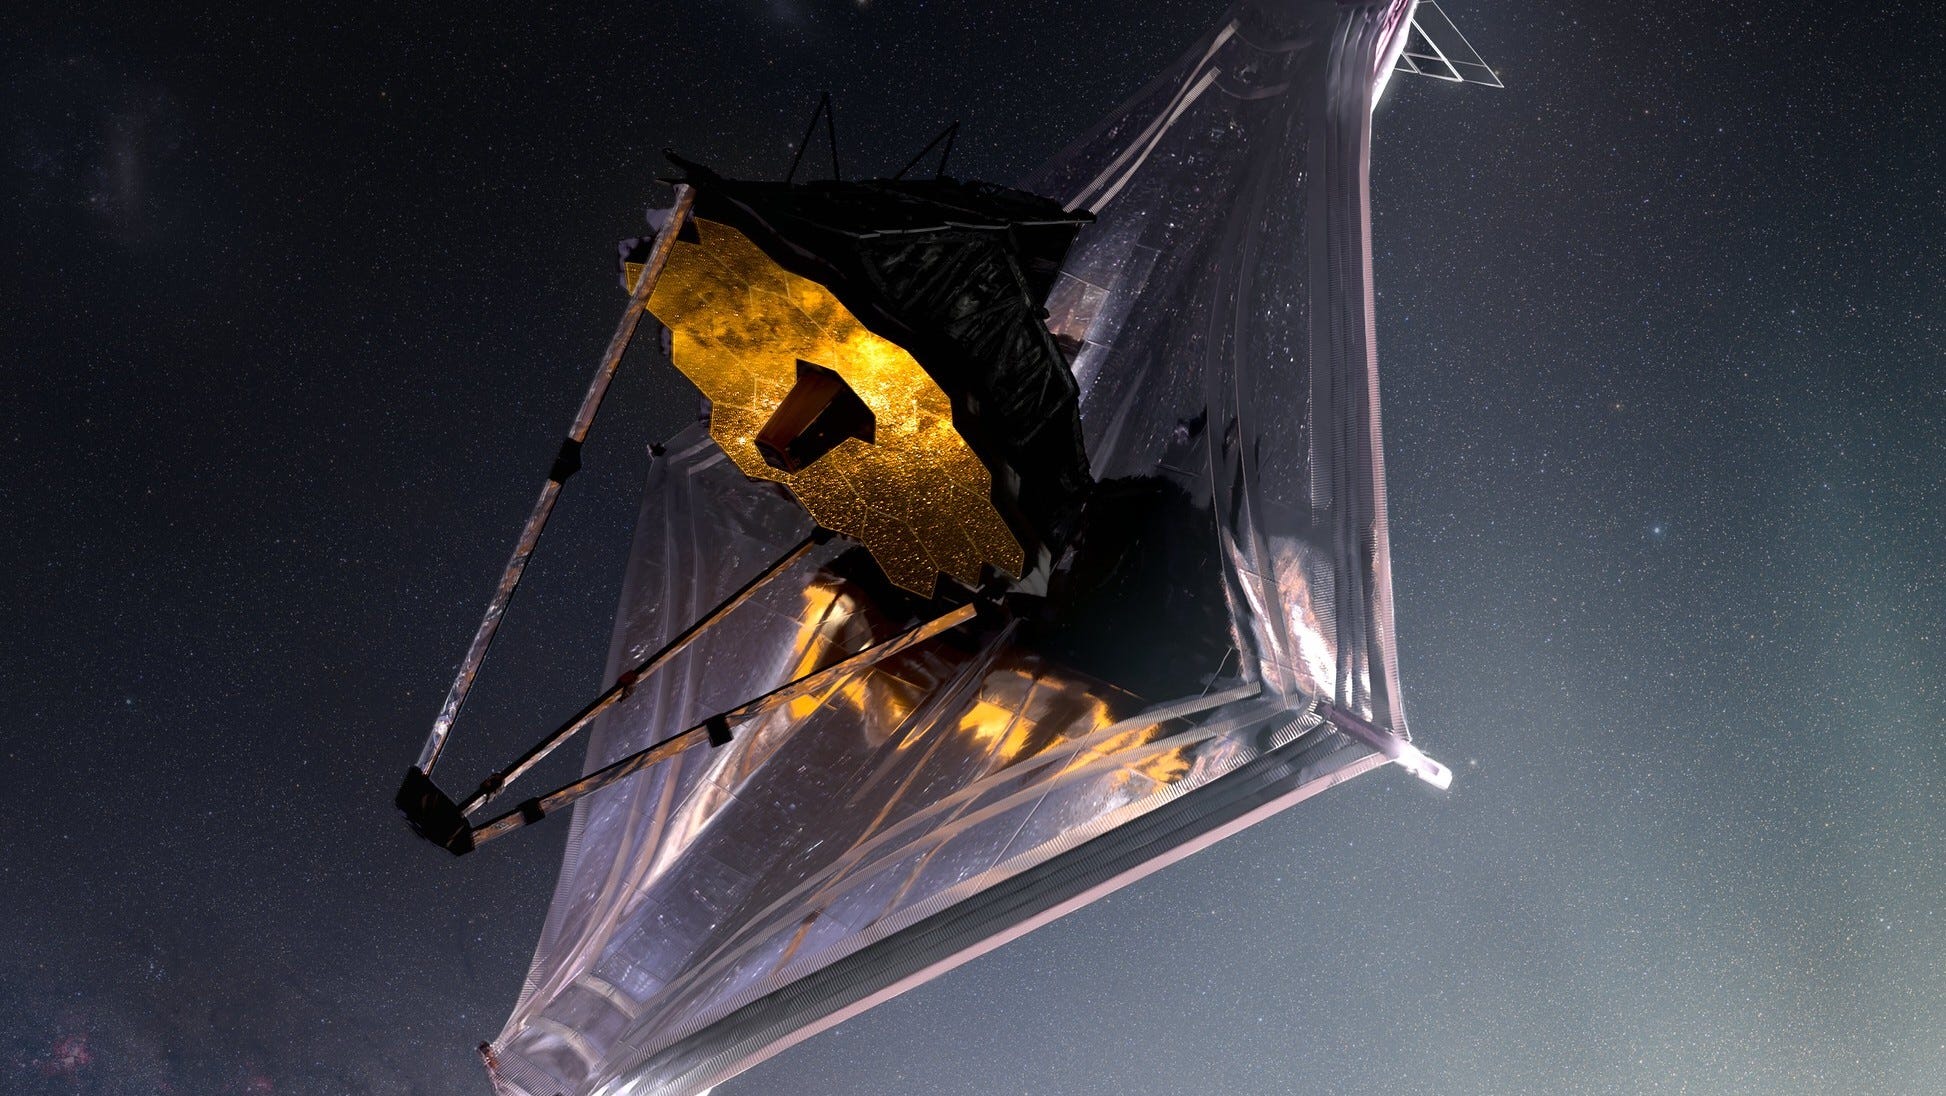 NASA Traces James Webb Space Telescope Glitch to Cosmic Ray From Outside Our Solar System